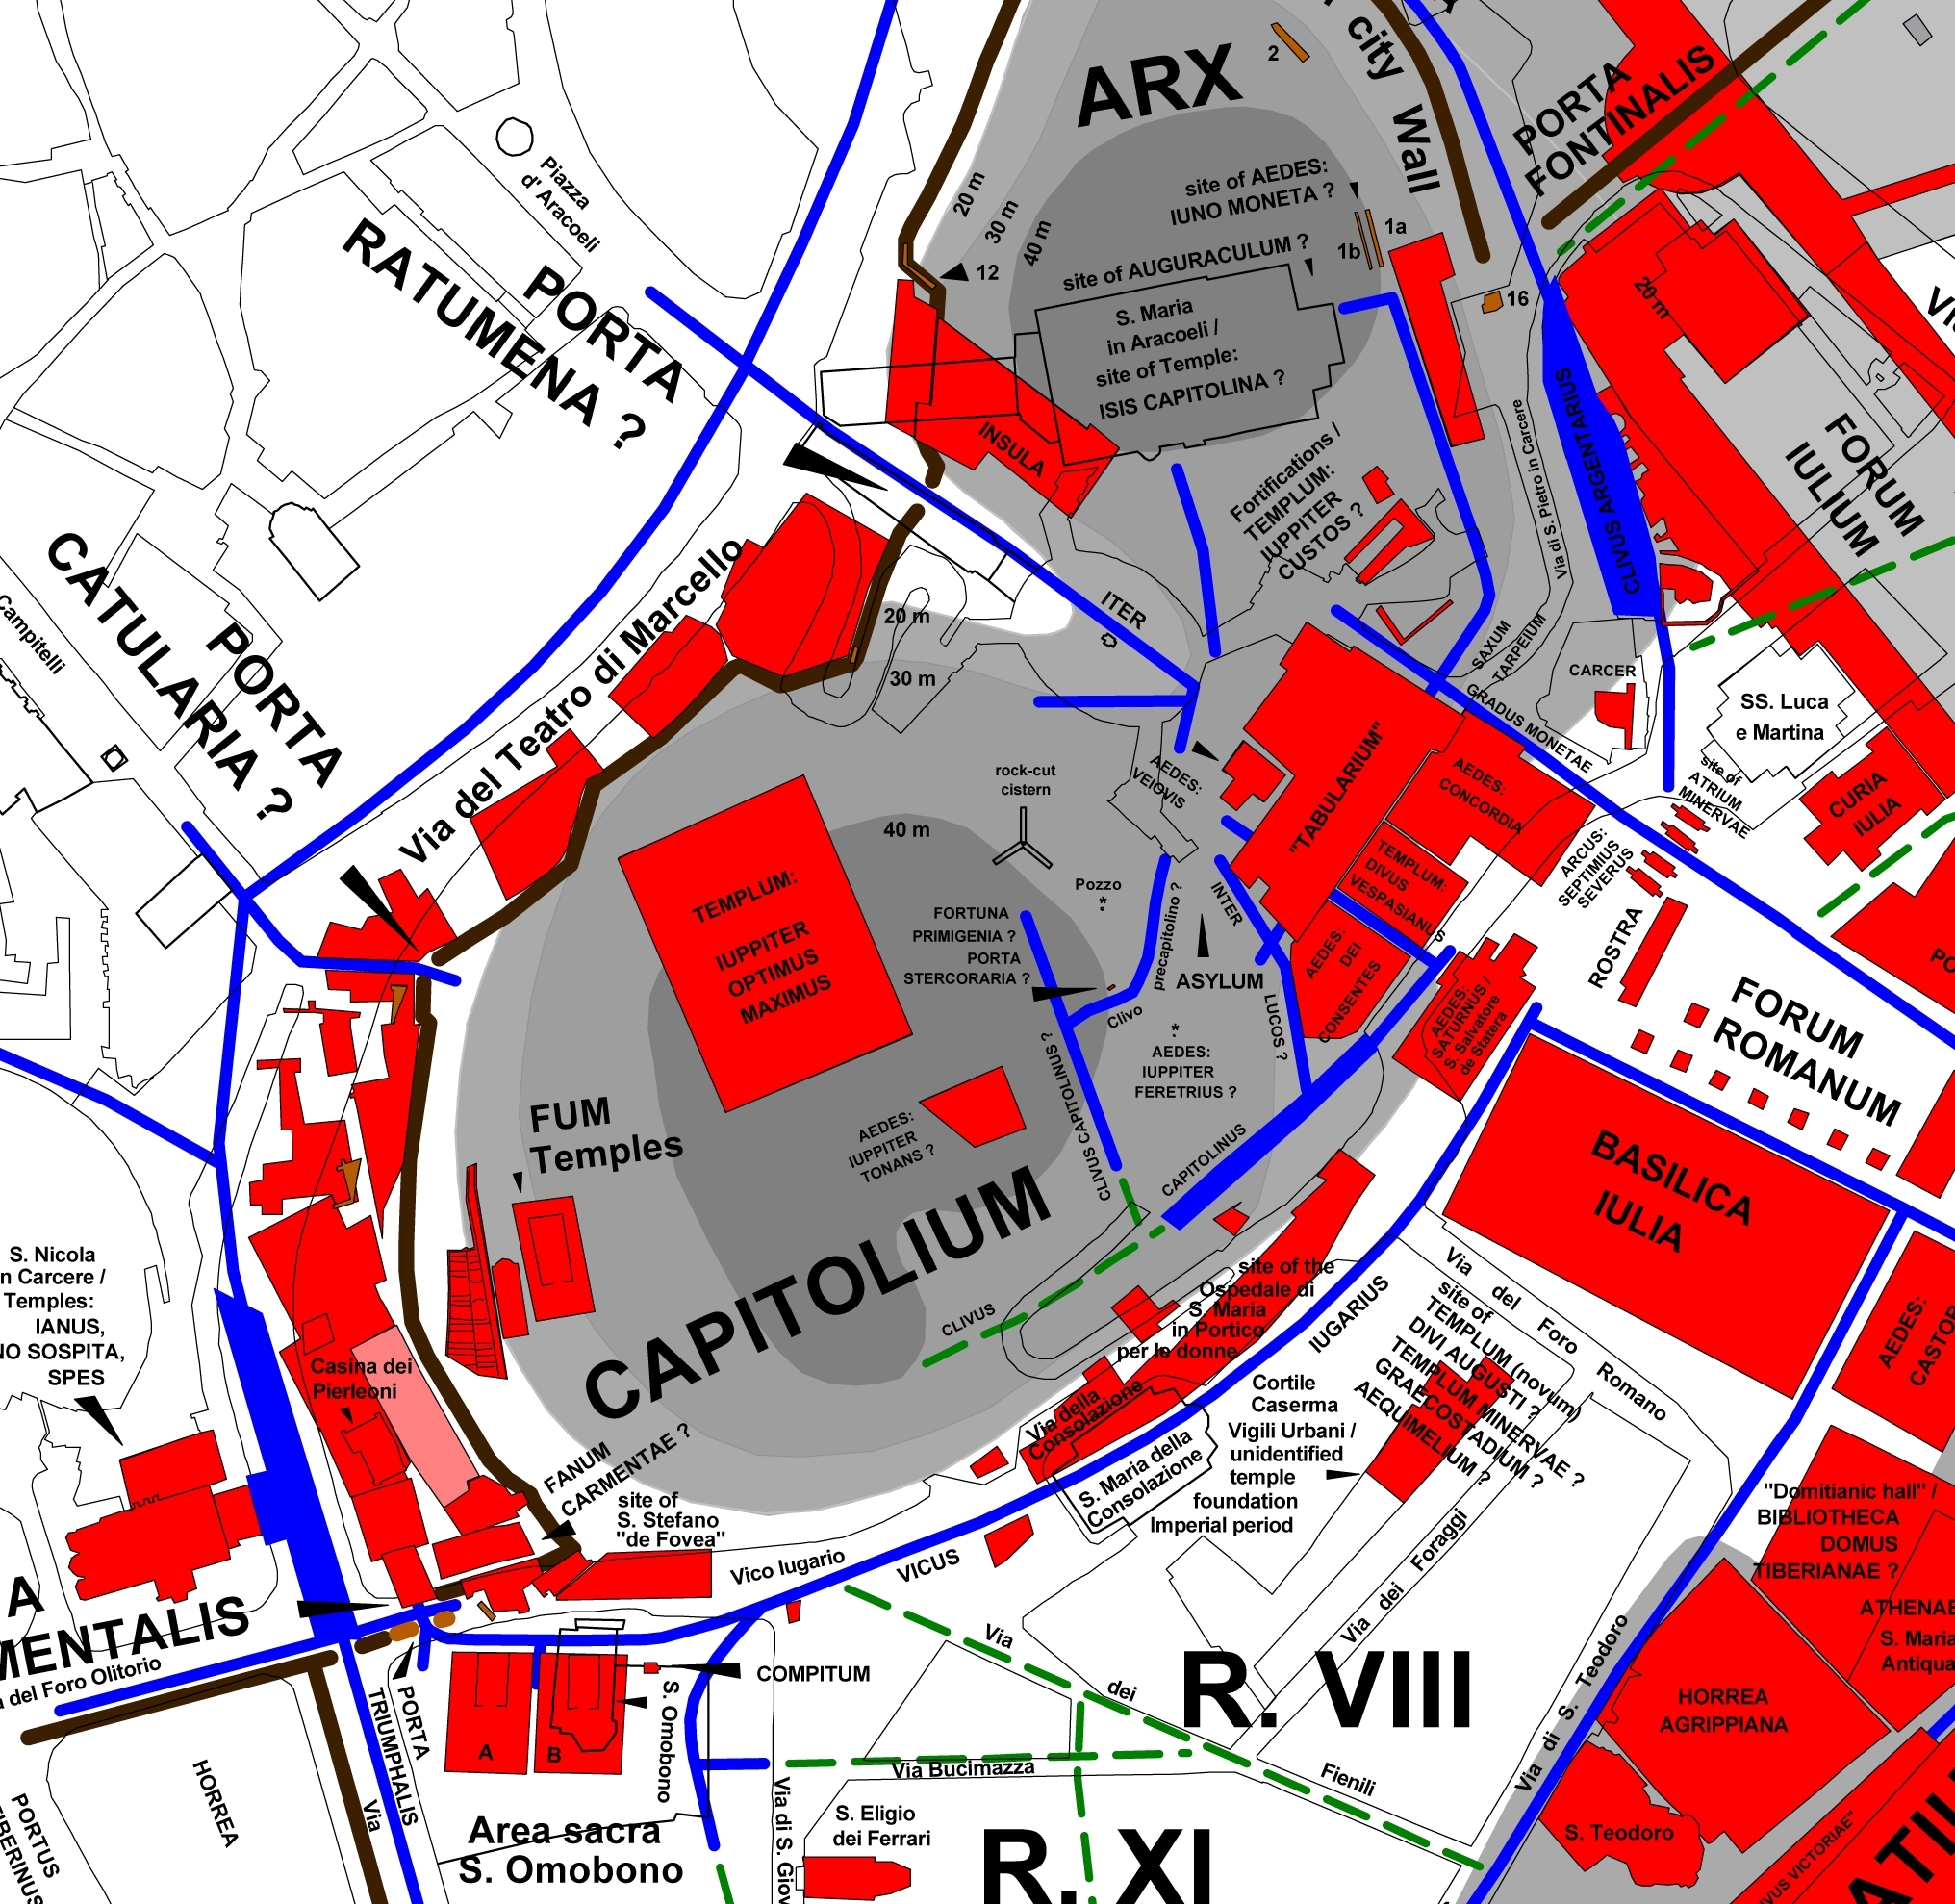 Fig. 6. Map showing the Capitoline Hill and the Forum Romanum. C. Häuber, AIS ROMA aus Chrystina Häuber 2014